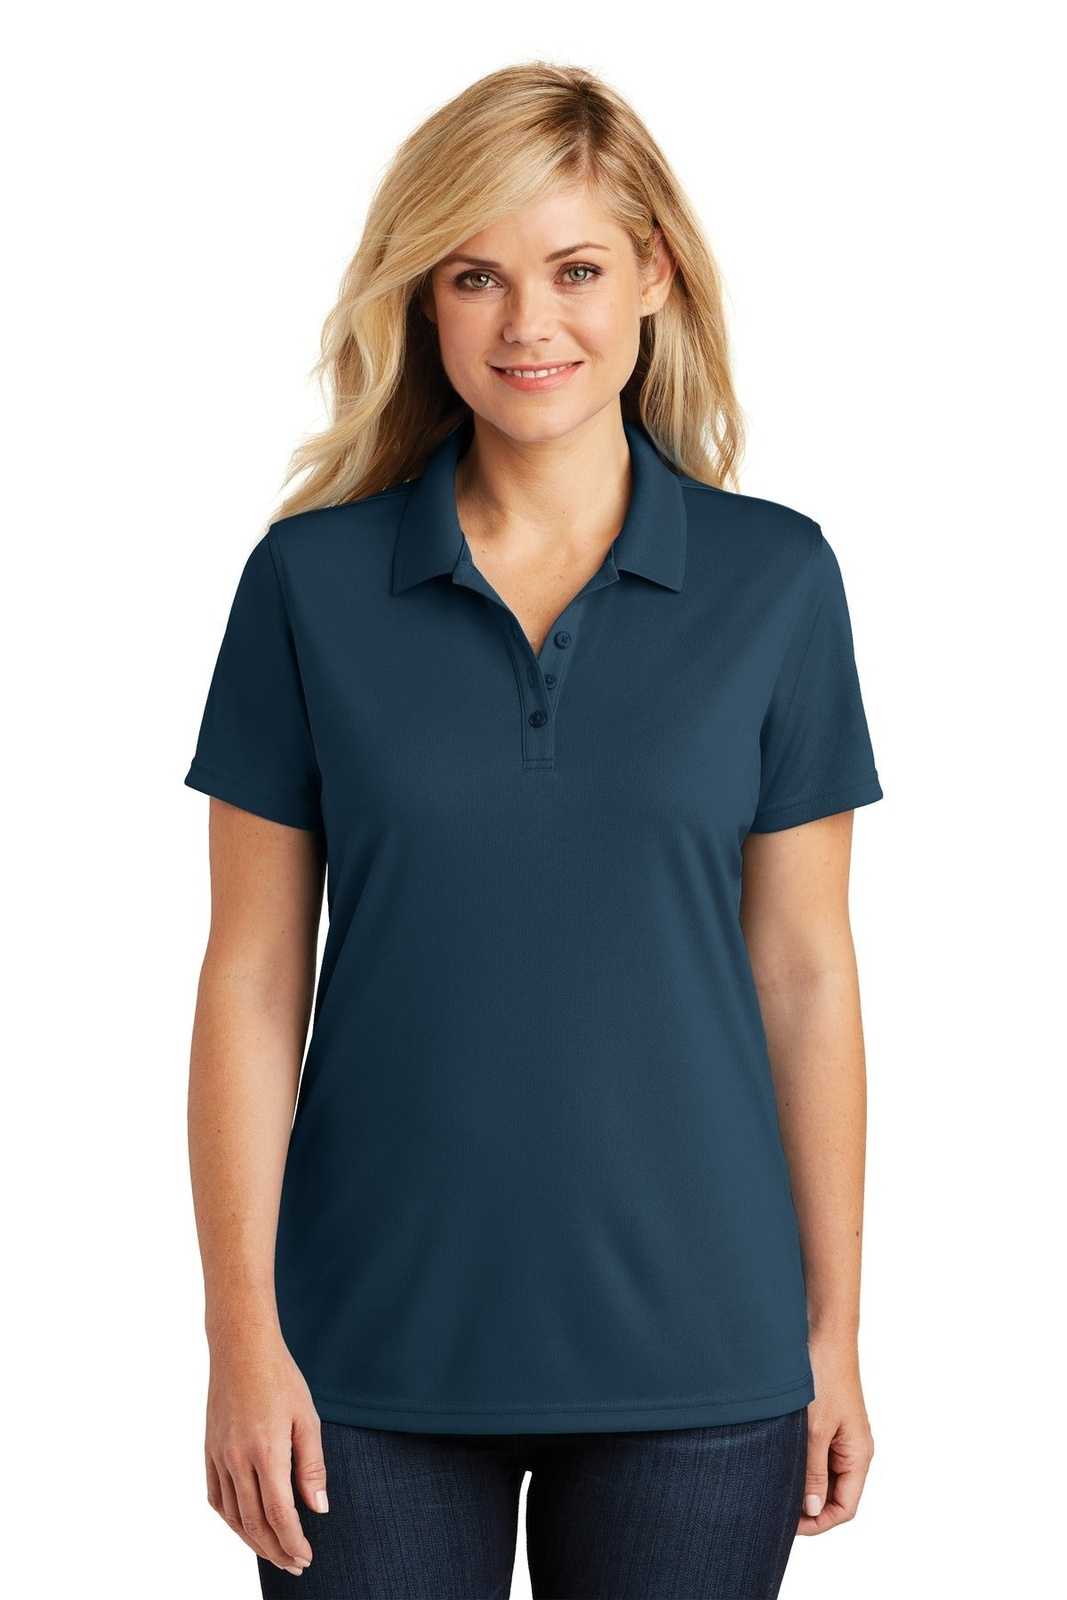 Port Authority LK110 Ladies Dry Zone UV Micro-Mesh Polo - River Blue Navy - HIT a Double - 1